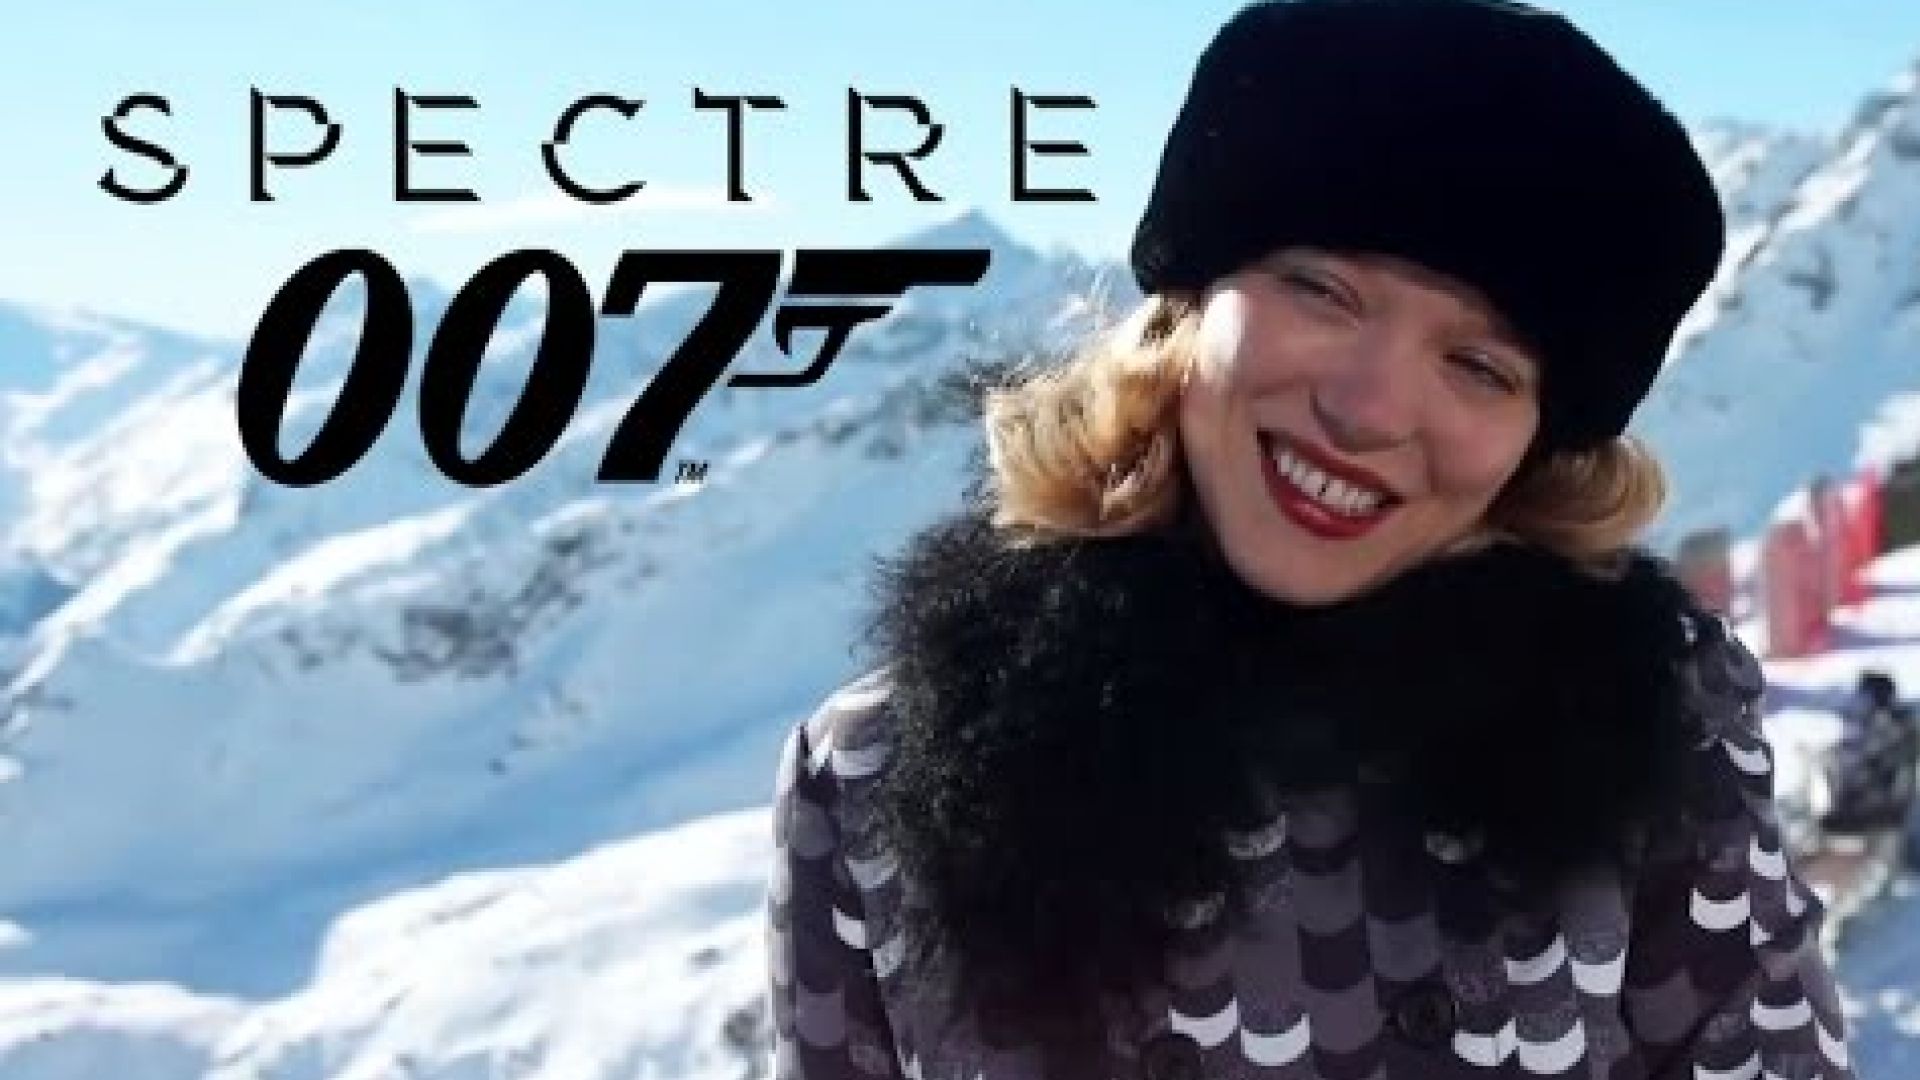 First Behind The Scenes Look at Spectre